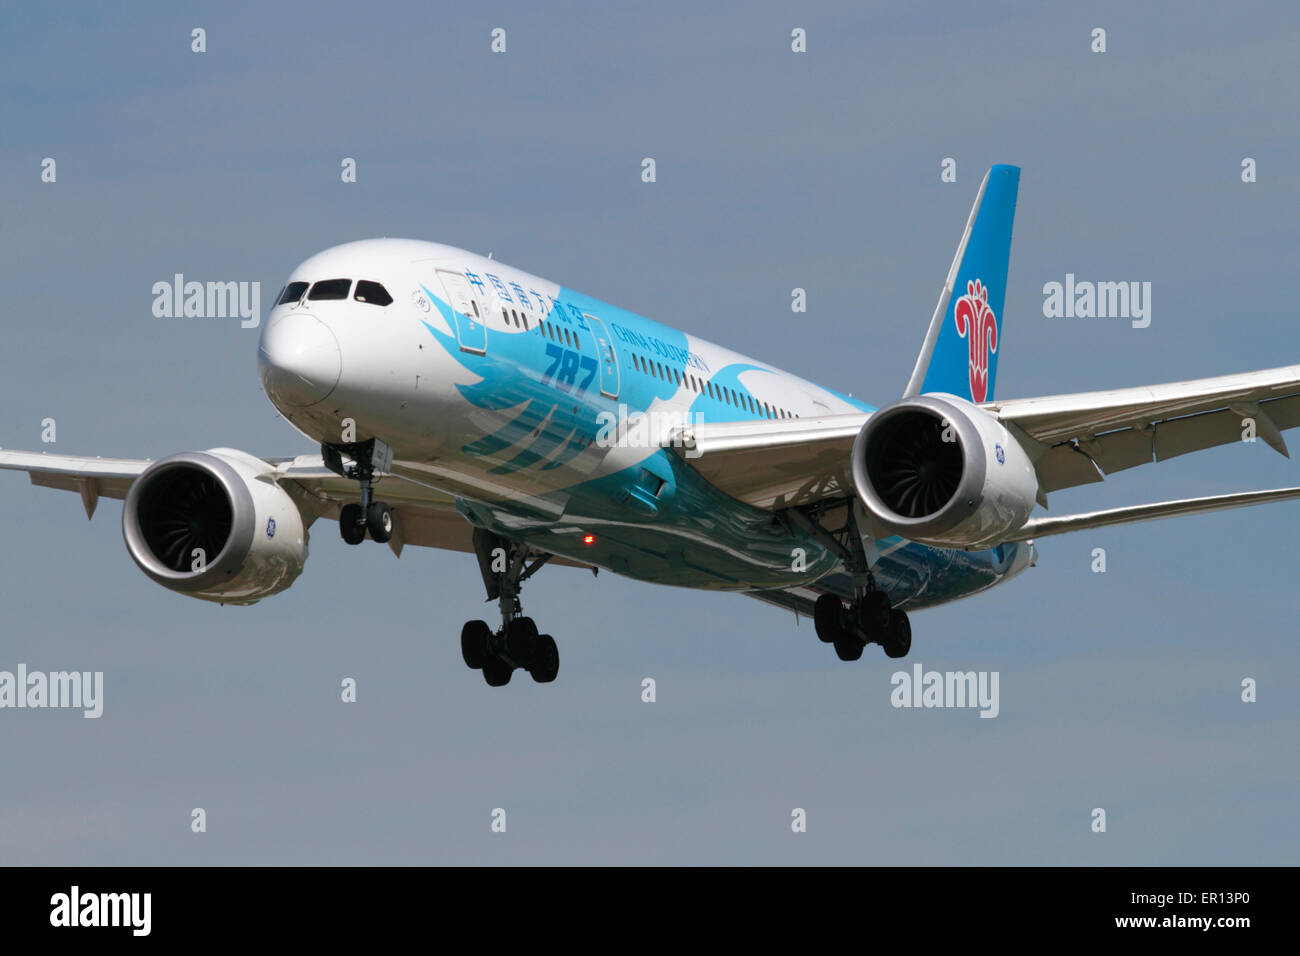 China Southern Airlines Boeing 787-8 Dreamliner long haul widebody passenger jet plane on approach. Closeup view from ahead. Modern aviation. Stock Photo